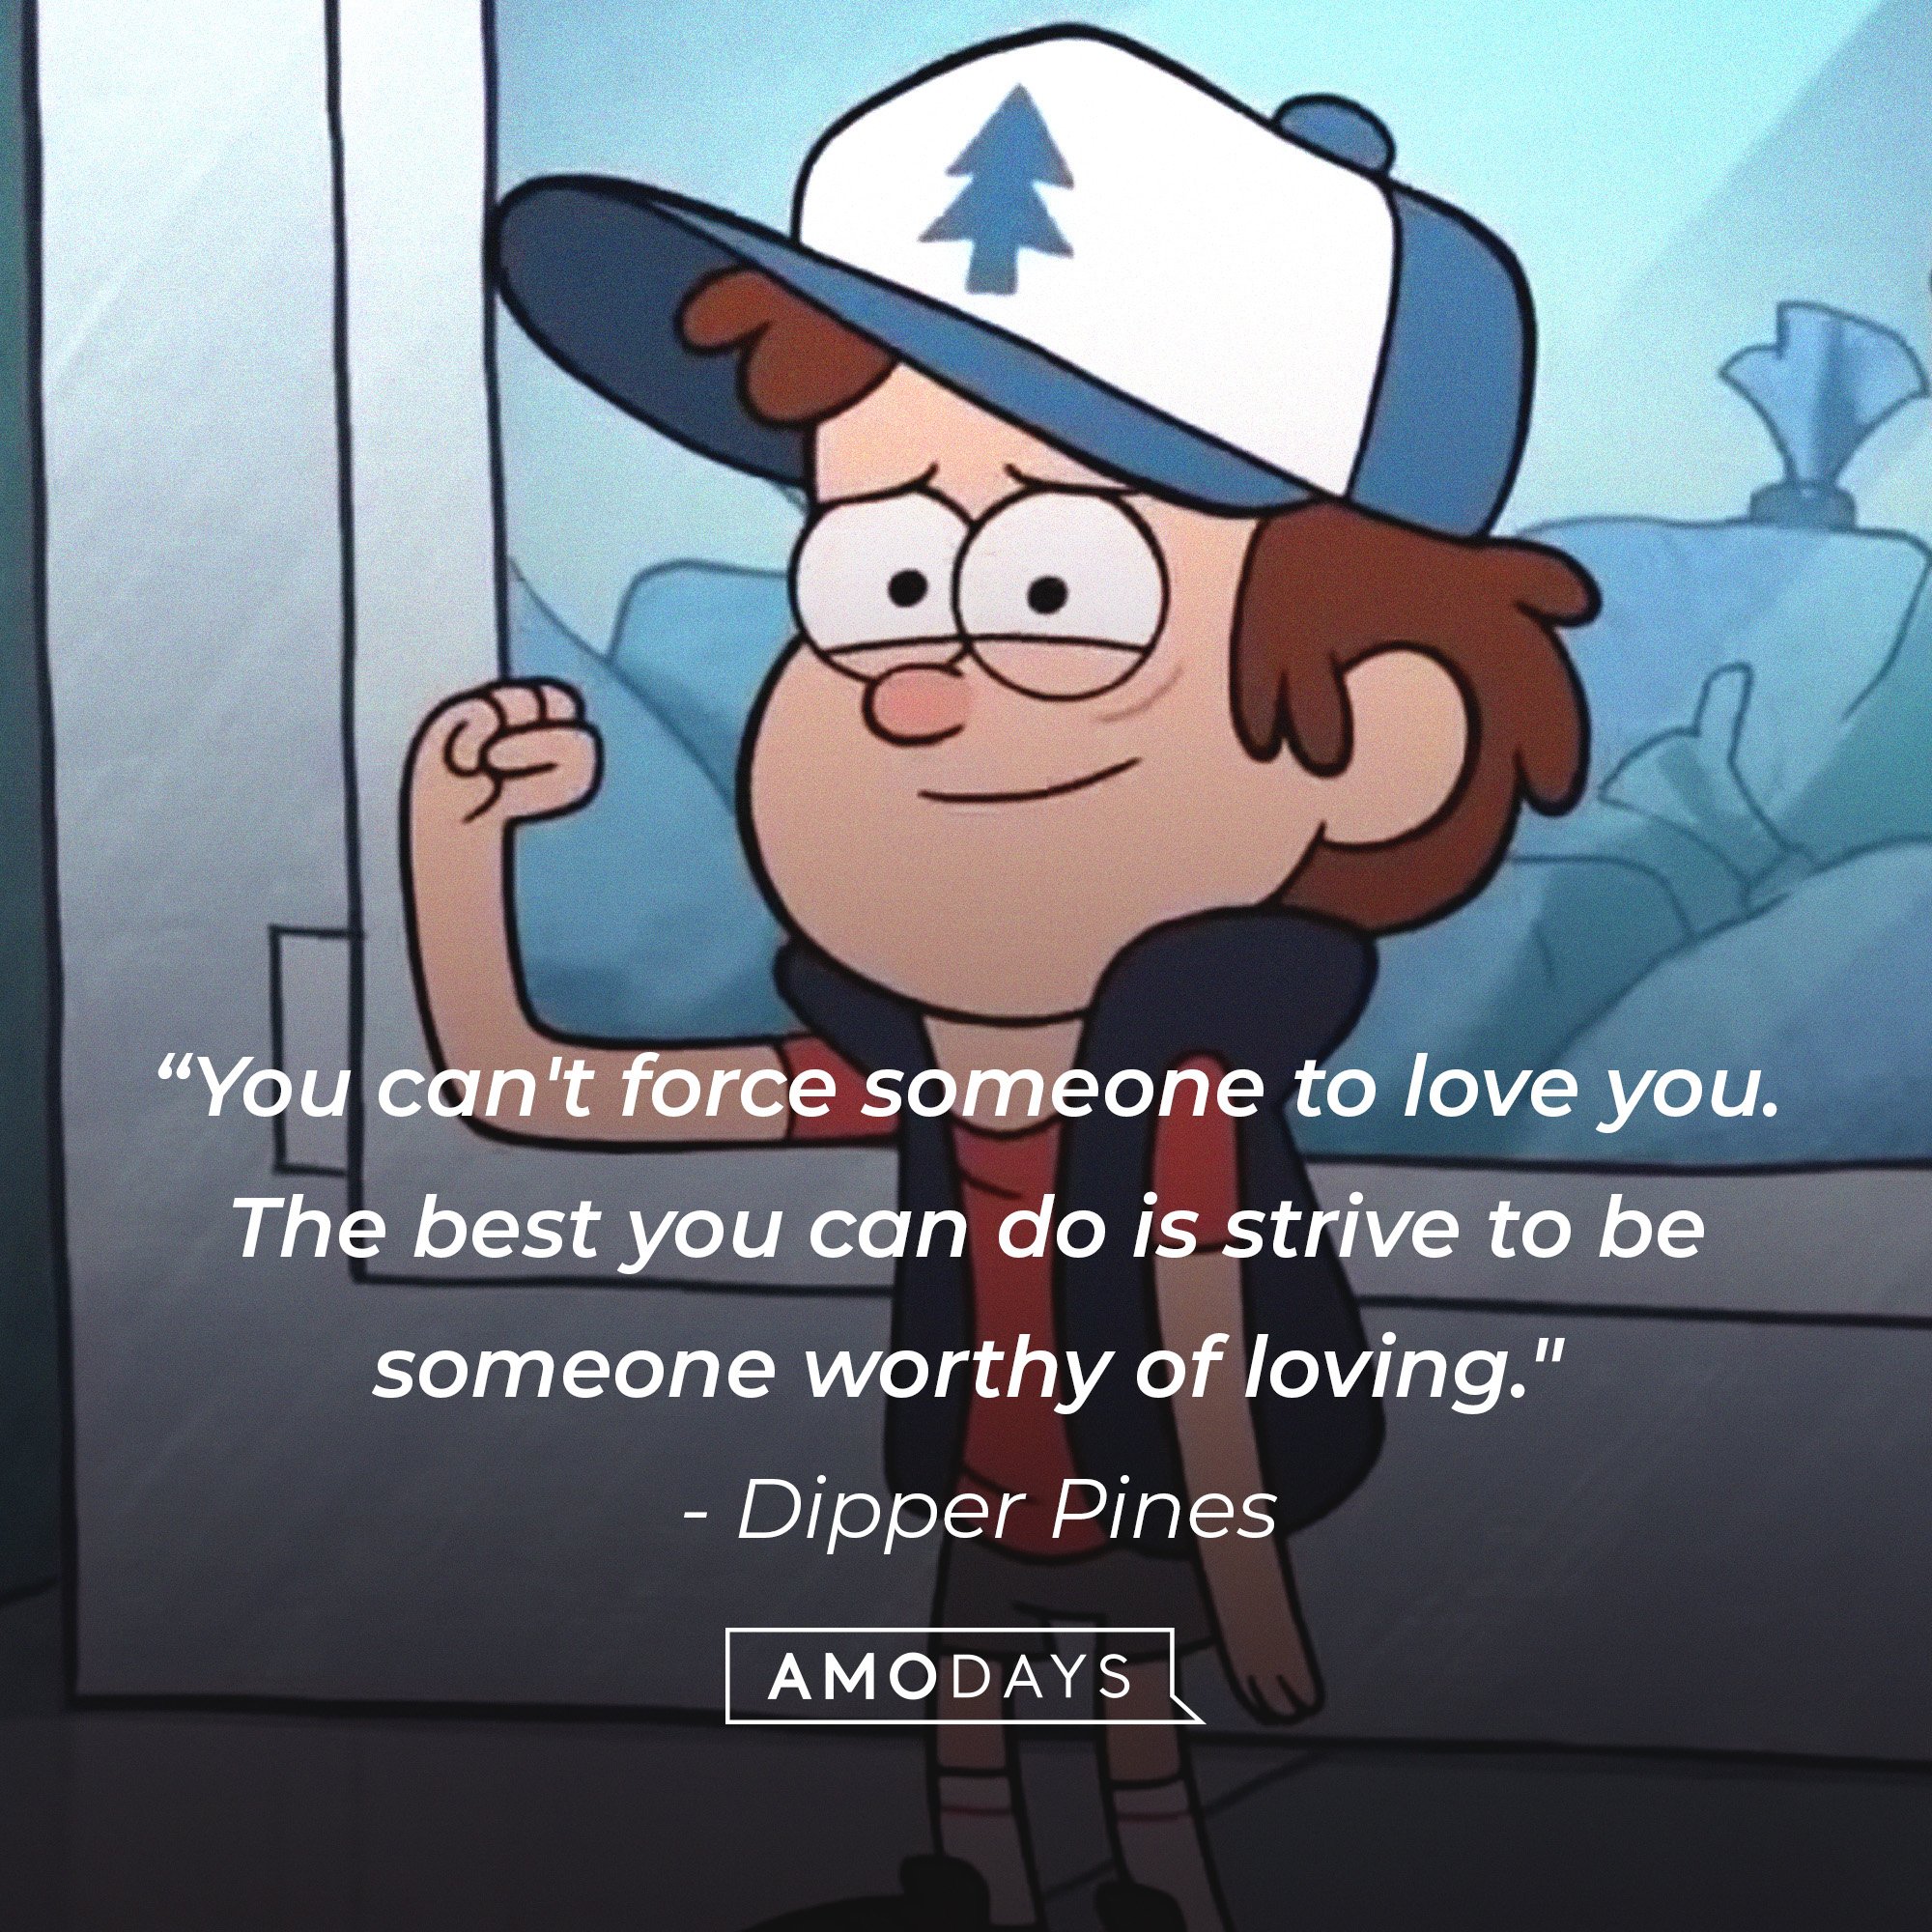 Dipper Pines’ quote: “You can't force someone to love you. The best you can do is strive to be someone worthy of loving." | Image: AmoDays